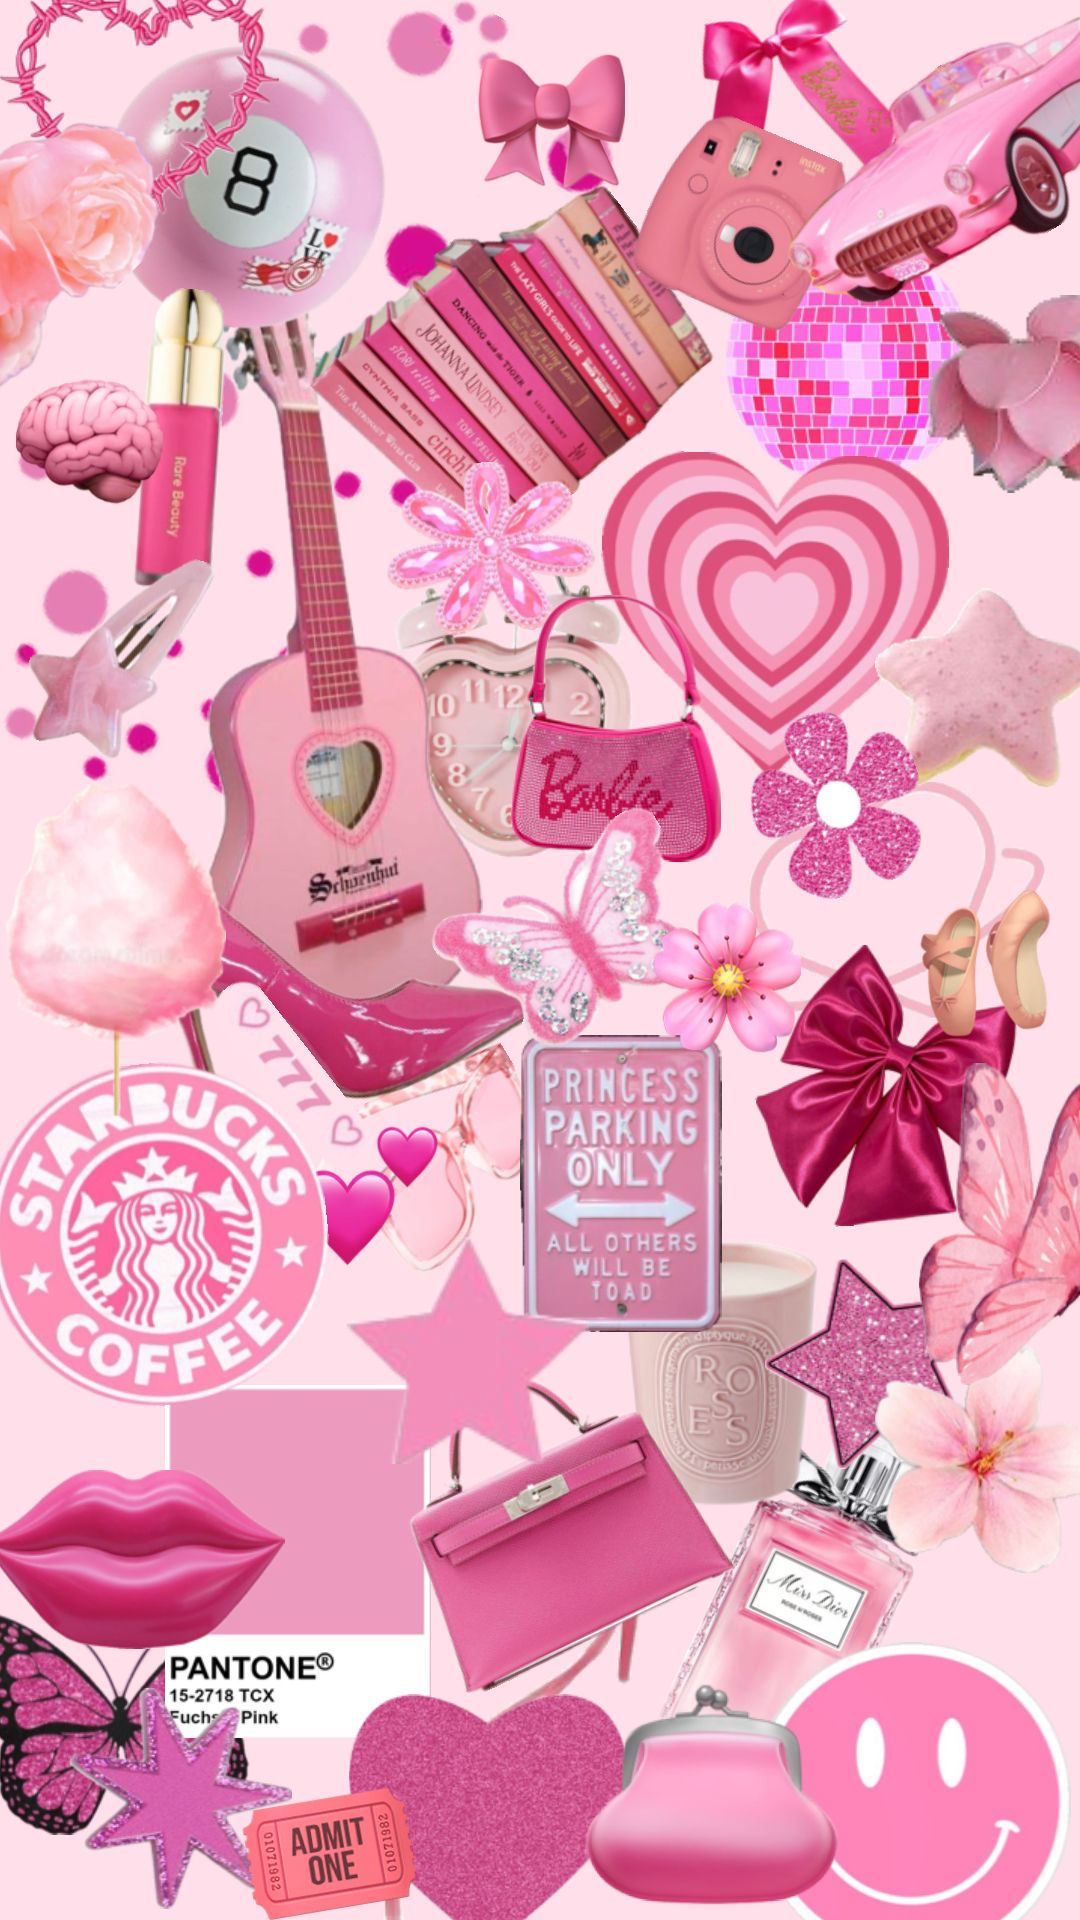 IPhone wallpaper pink aesthetic with images - Pink collage